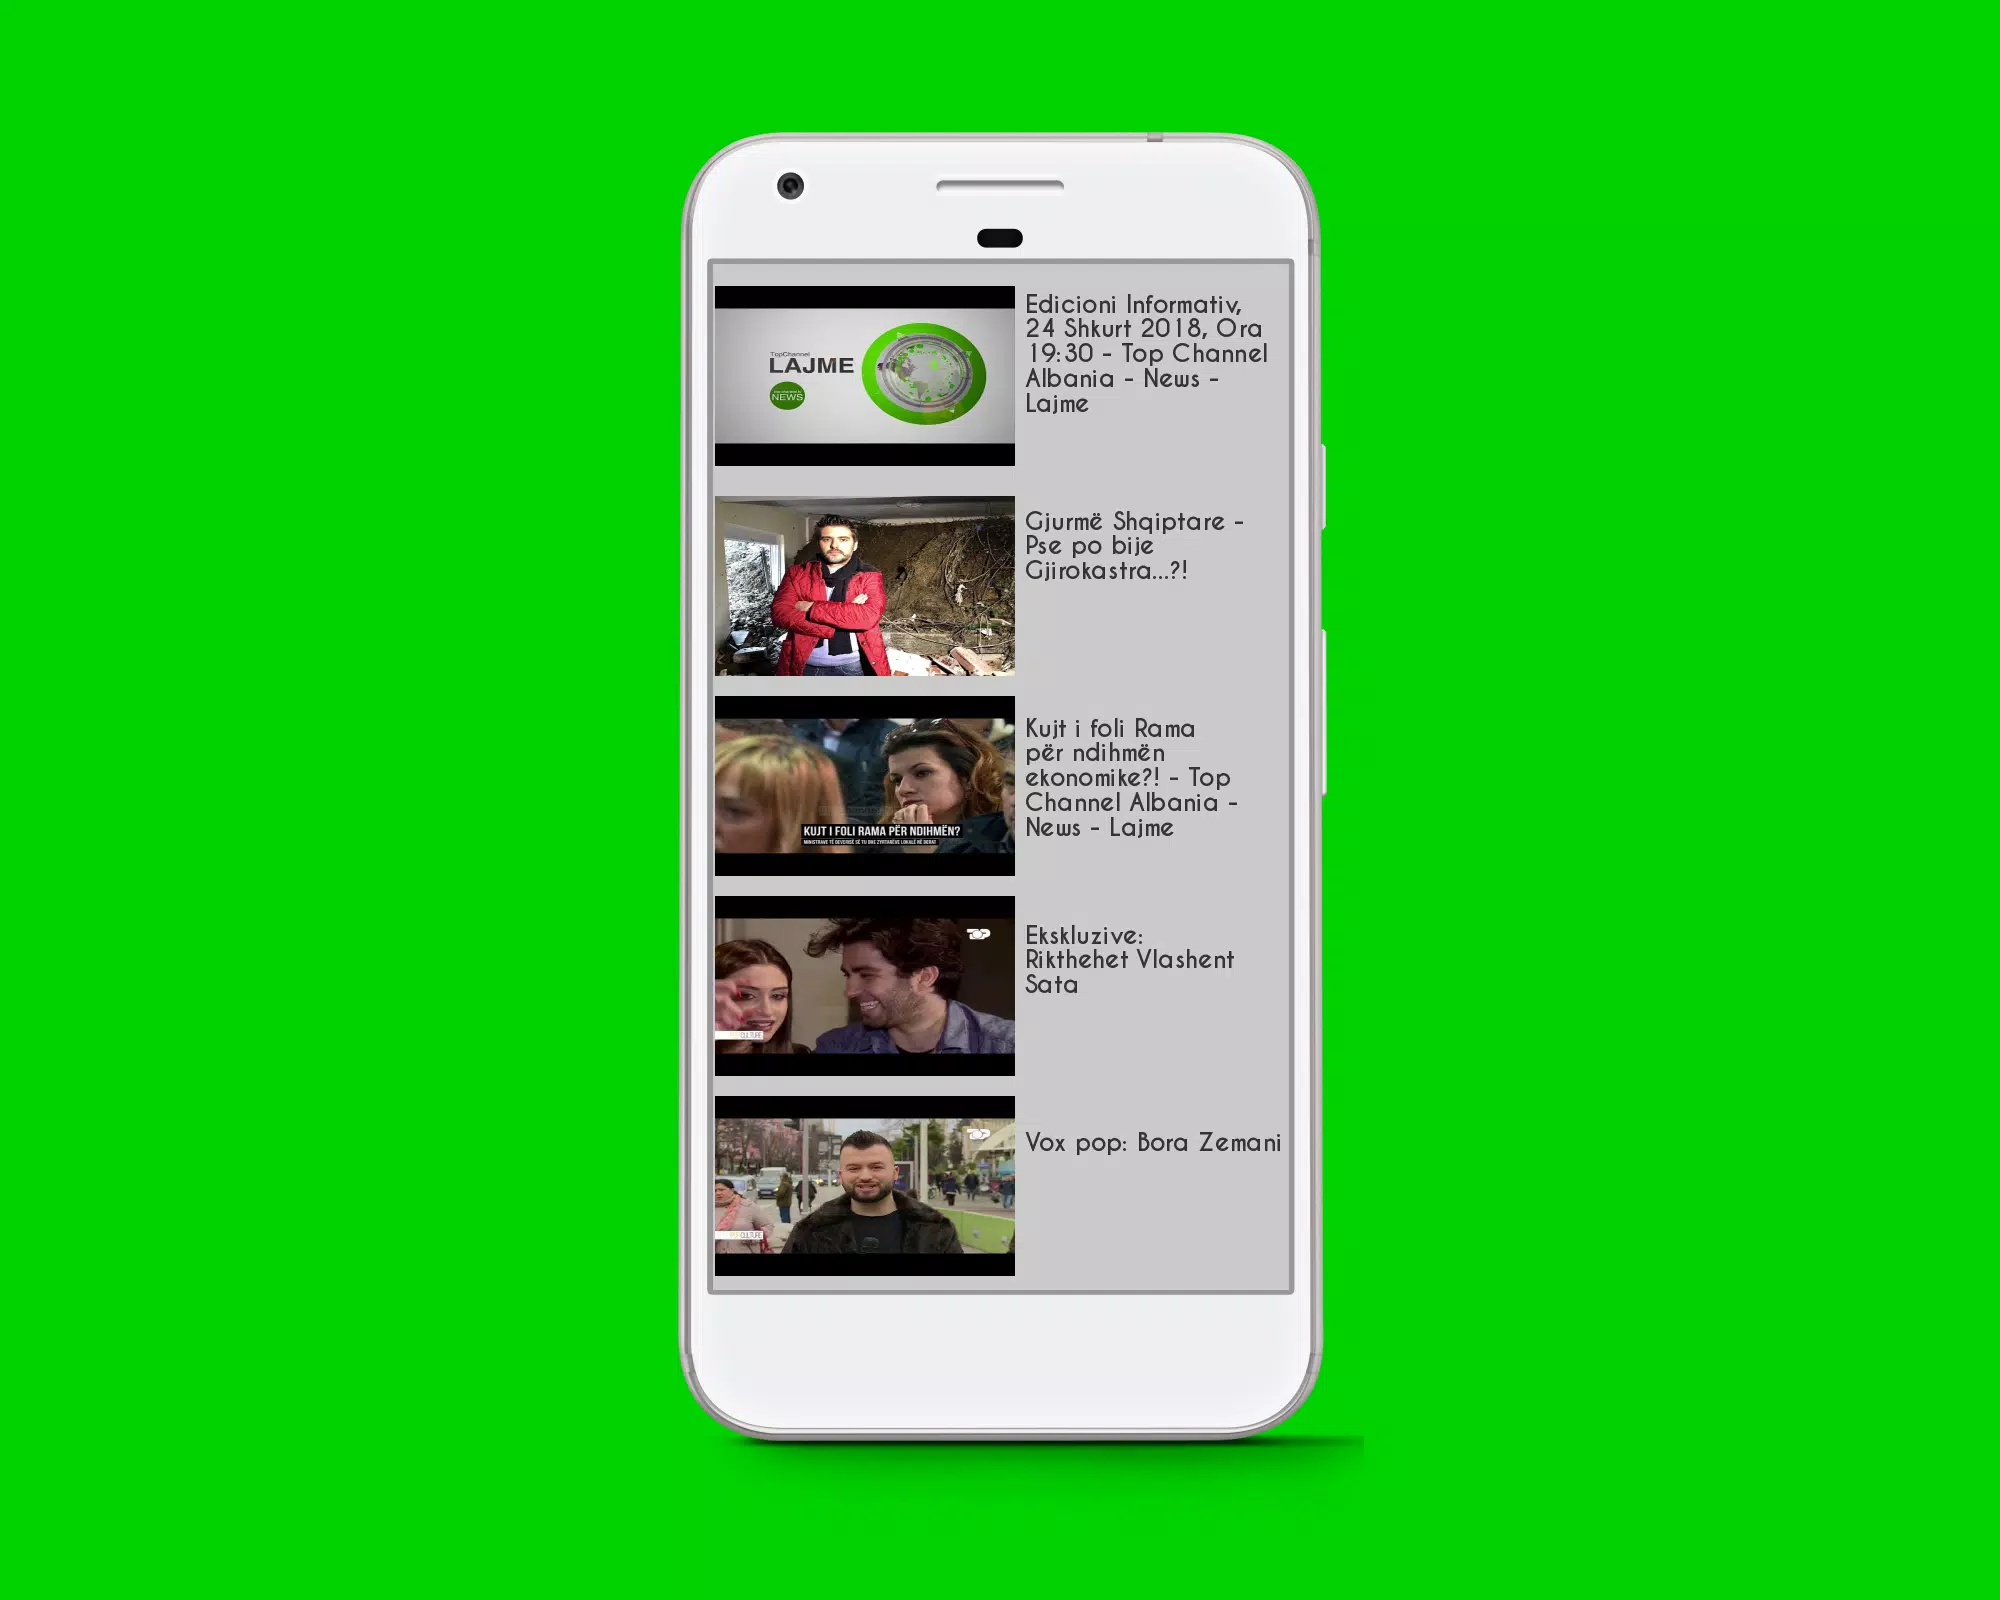 Top Channel Albania Video List for Android - APK Download